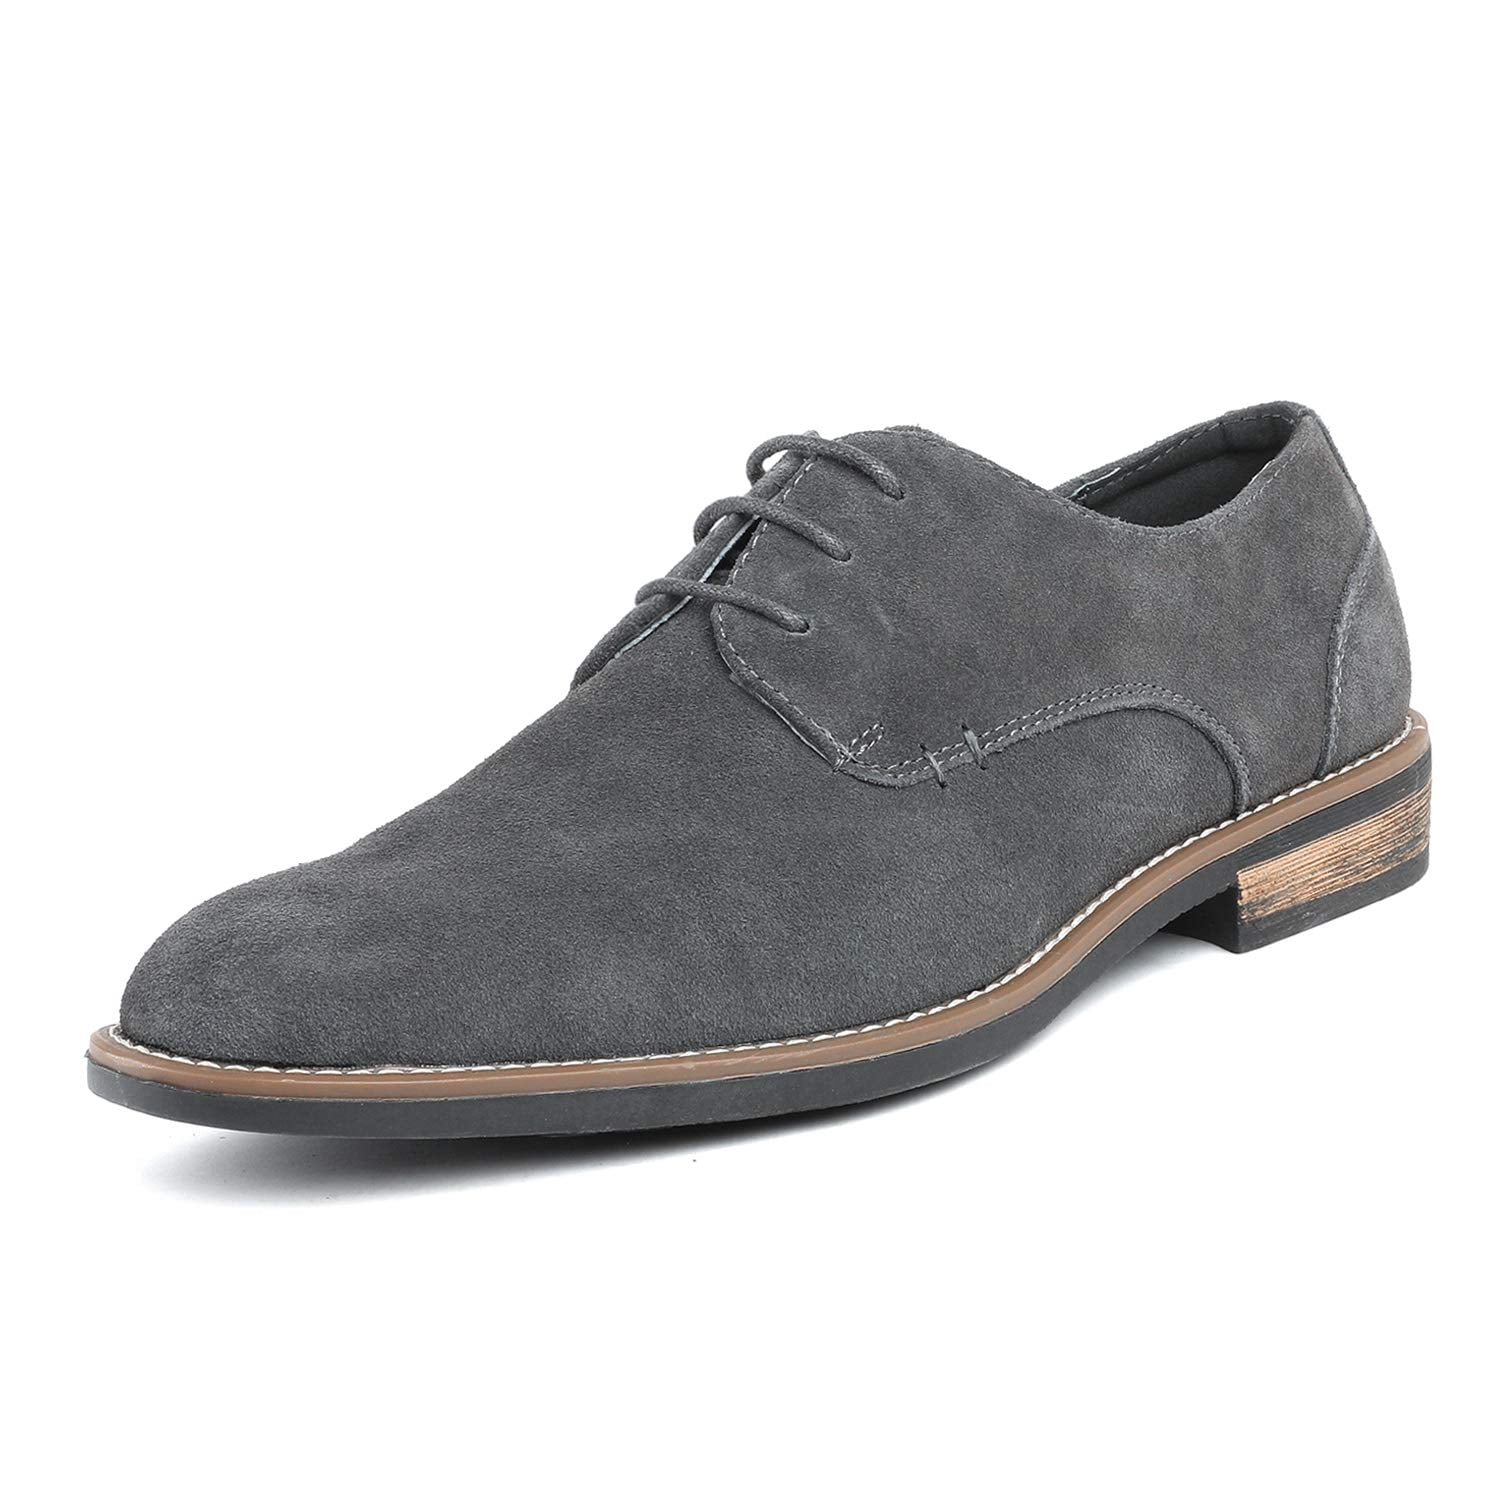 Bruno Marc Mens Oxford Shoes Lace Up ...